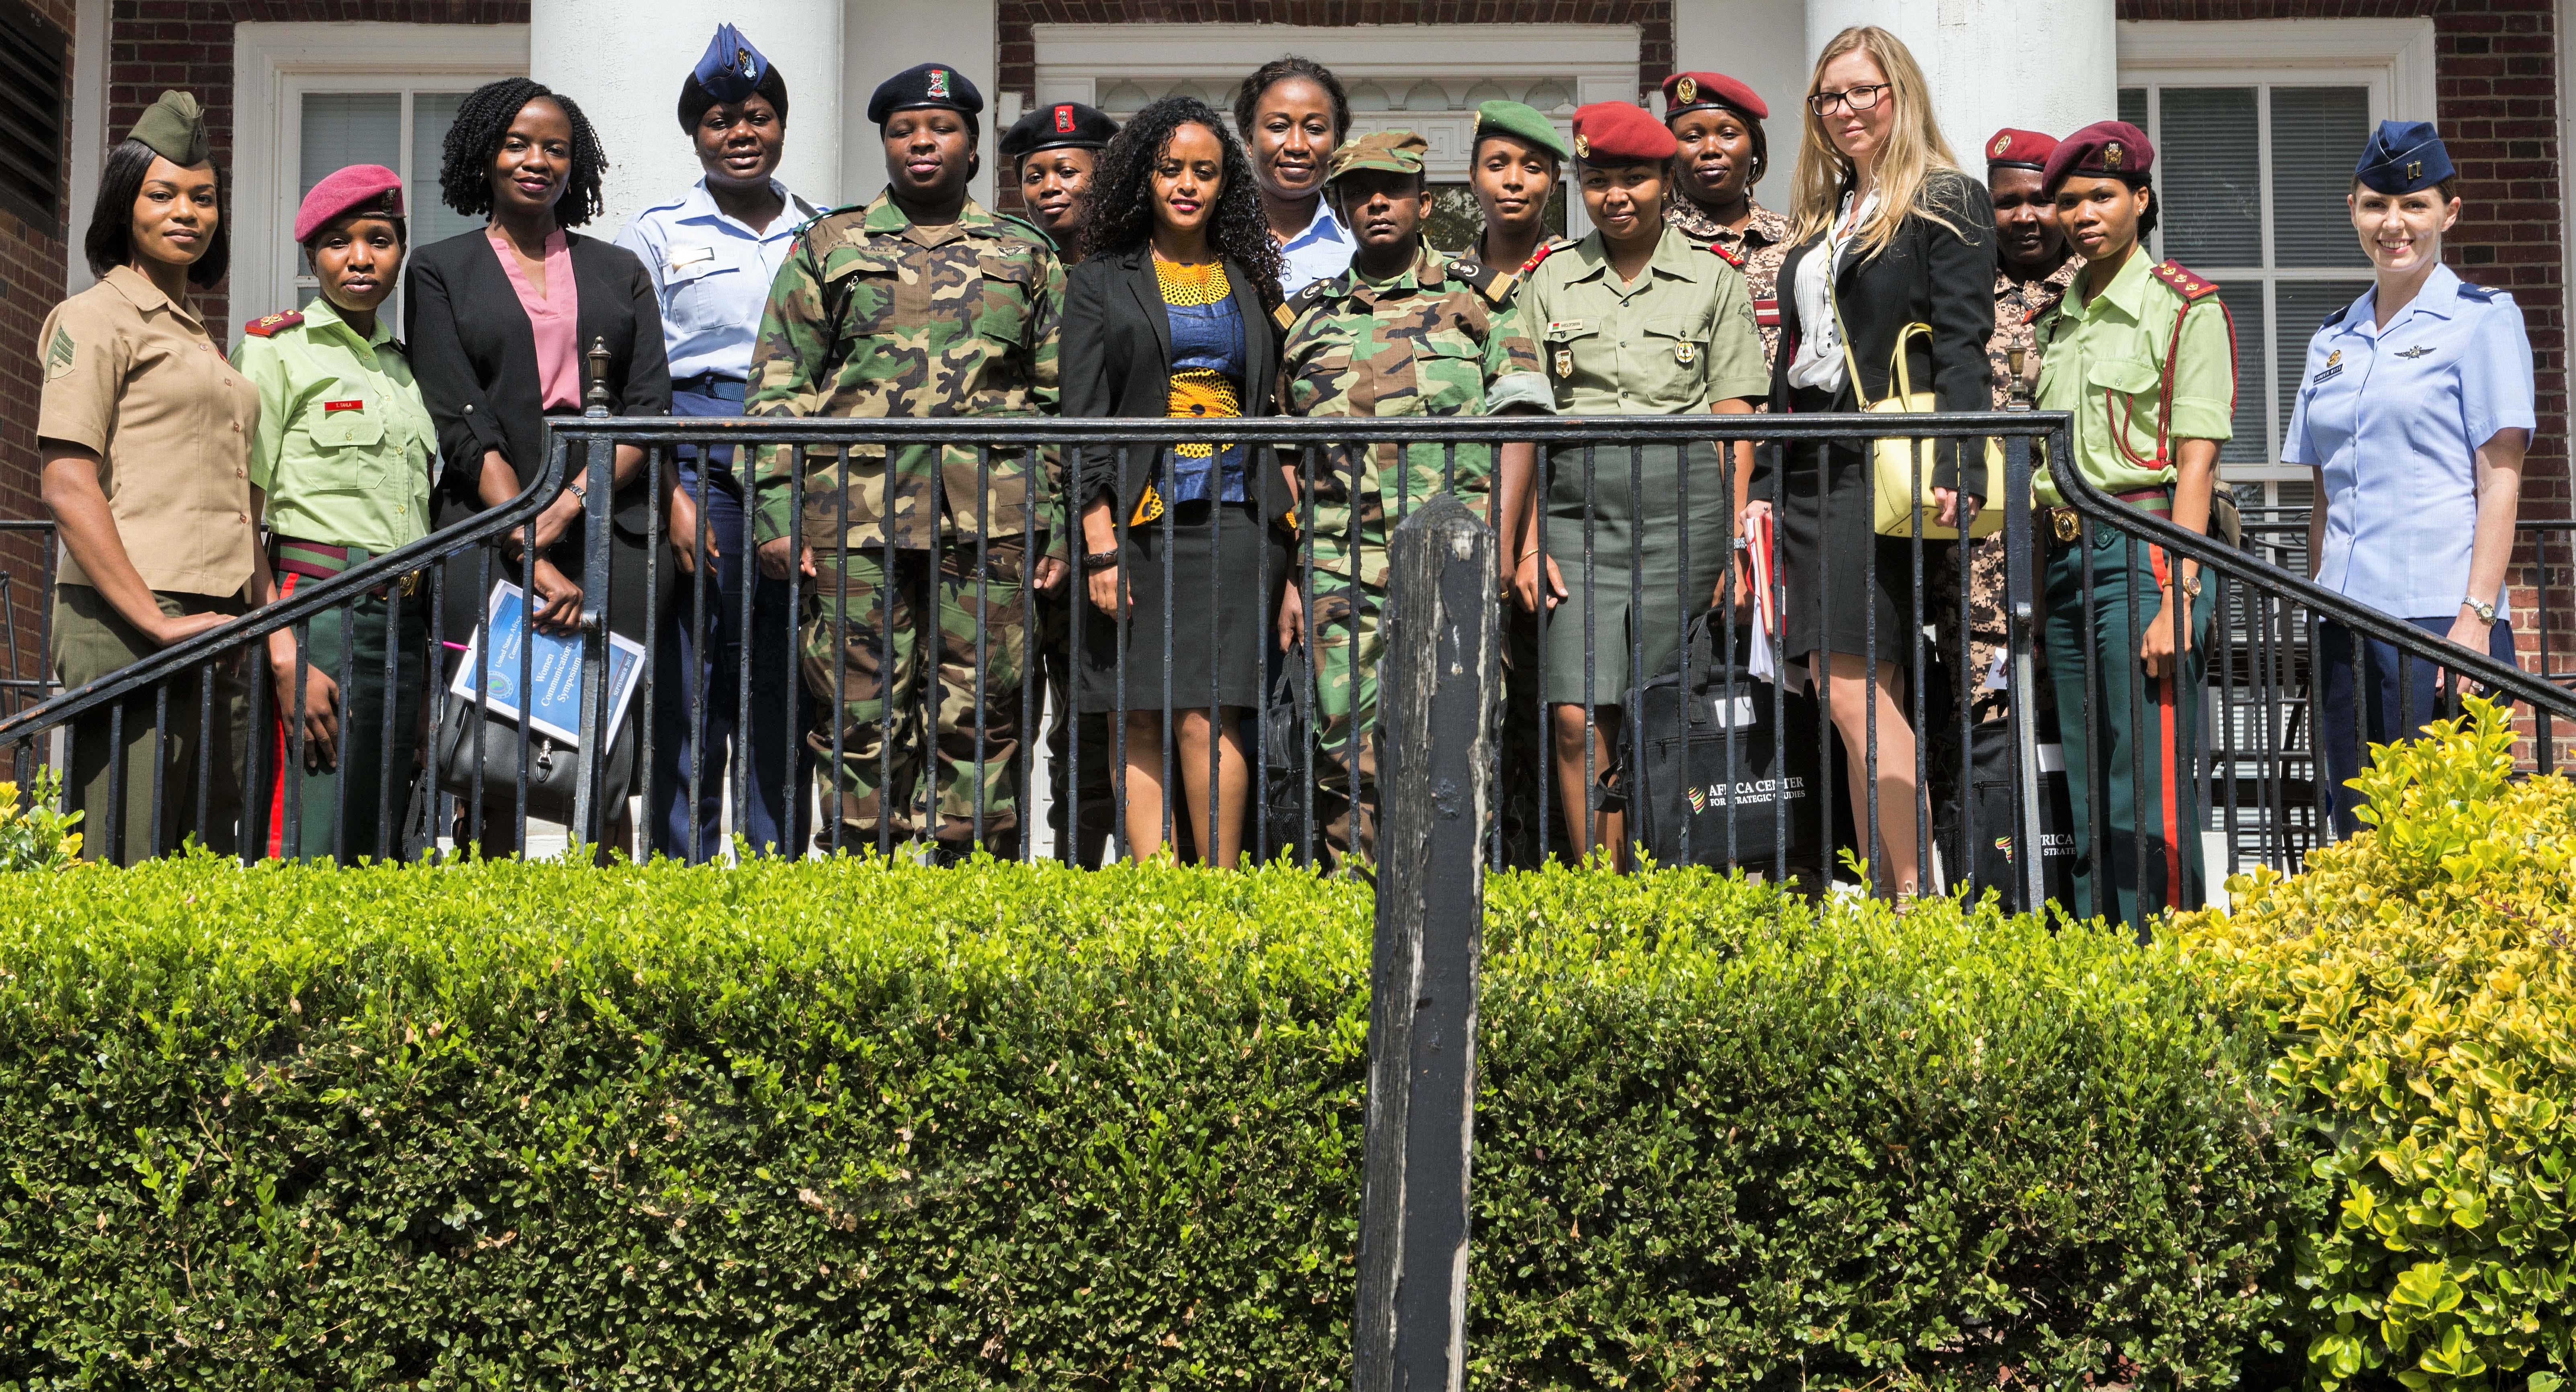 Participants attending the AFRICOM “Women, Peace and Security” forum pose for a photo.